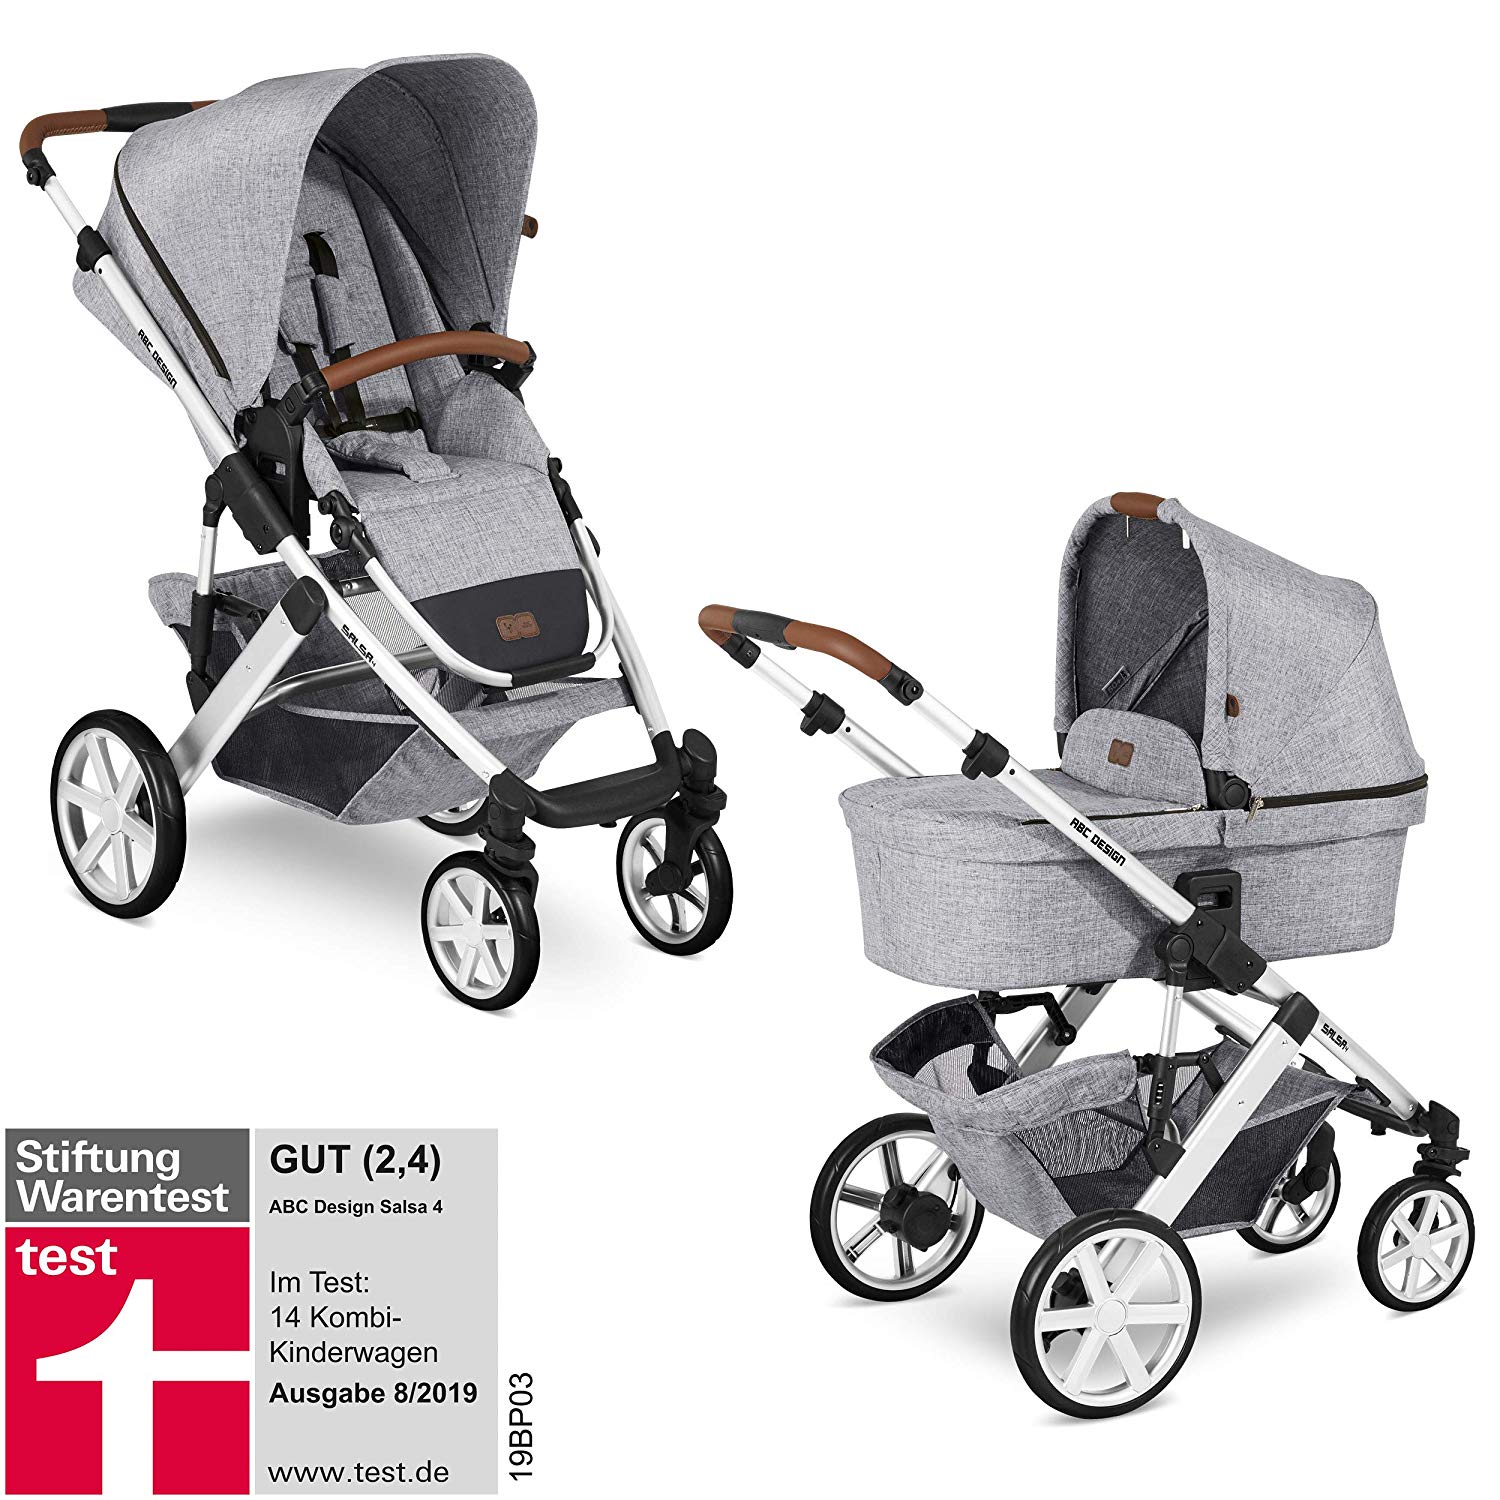 ABC Design Salsa 4 Pushchair - Combination Pram for Newborns & Babies up to 22 kg - Includes Sports Seat & Carry Cot - Small Folding Size & Extra Light - Colour: Graphite Grey